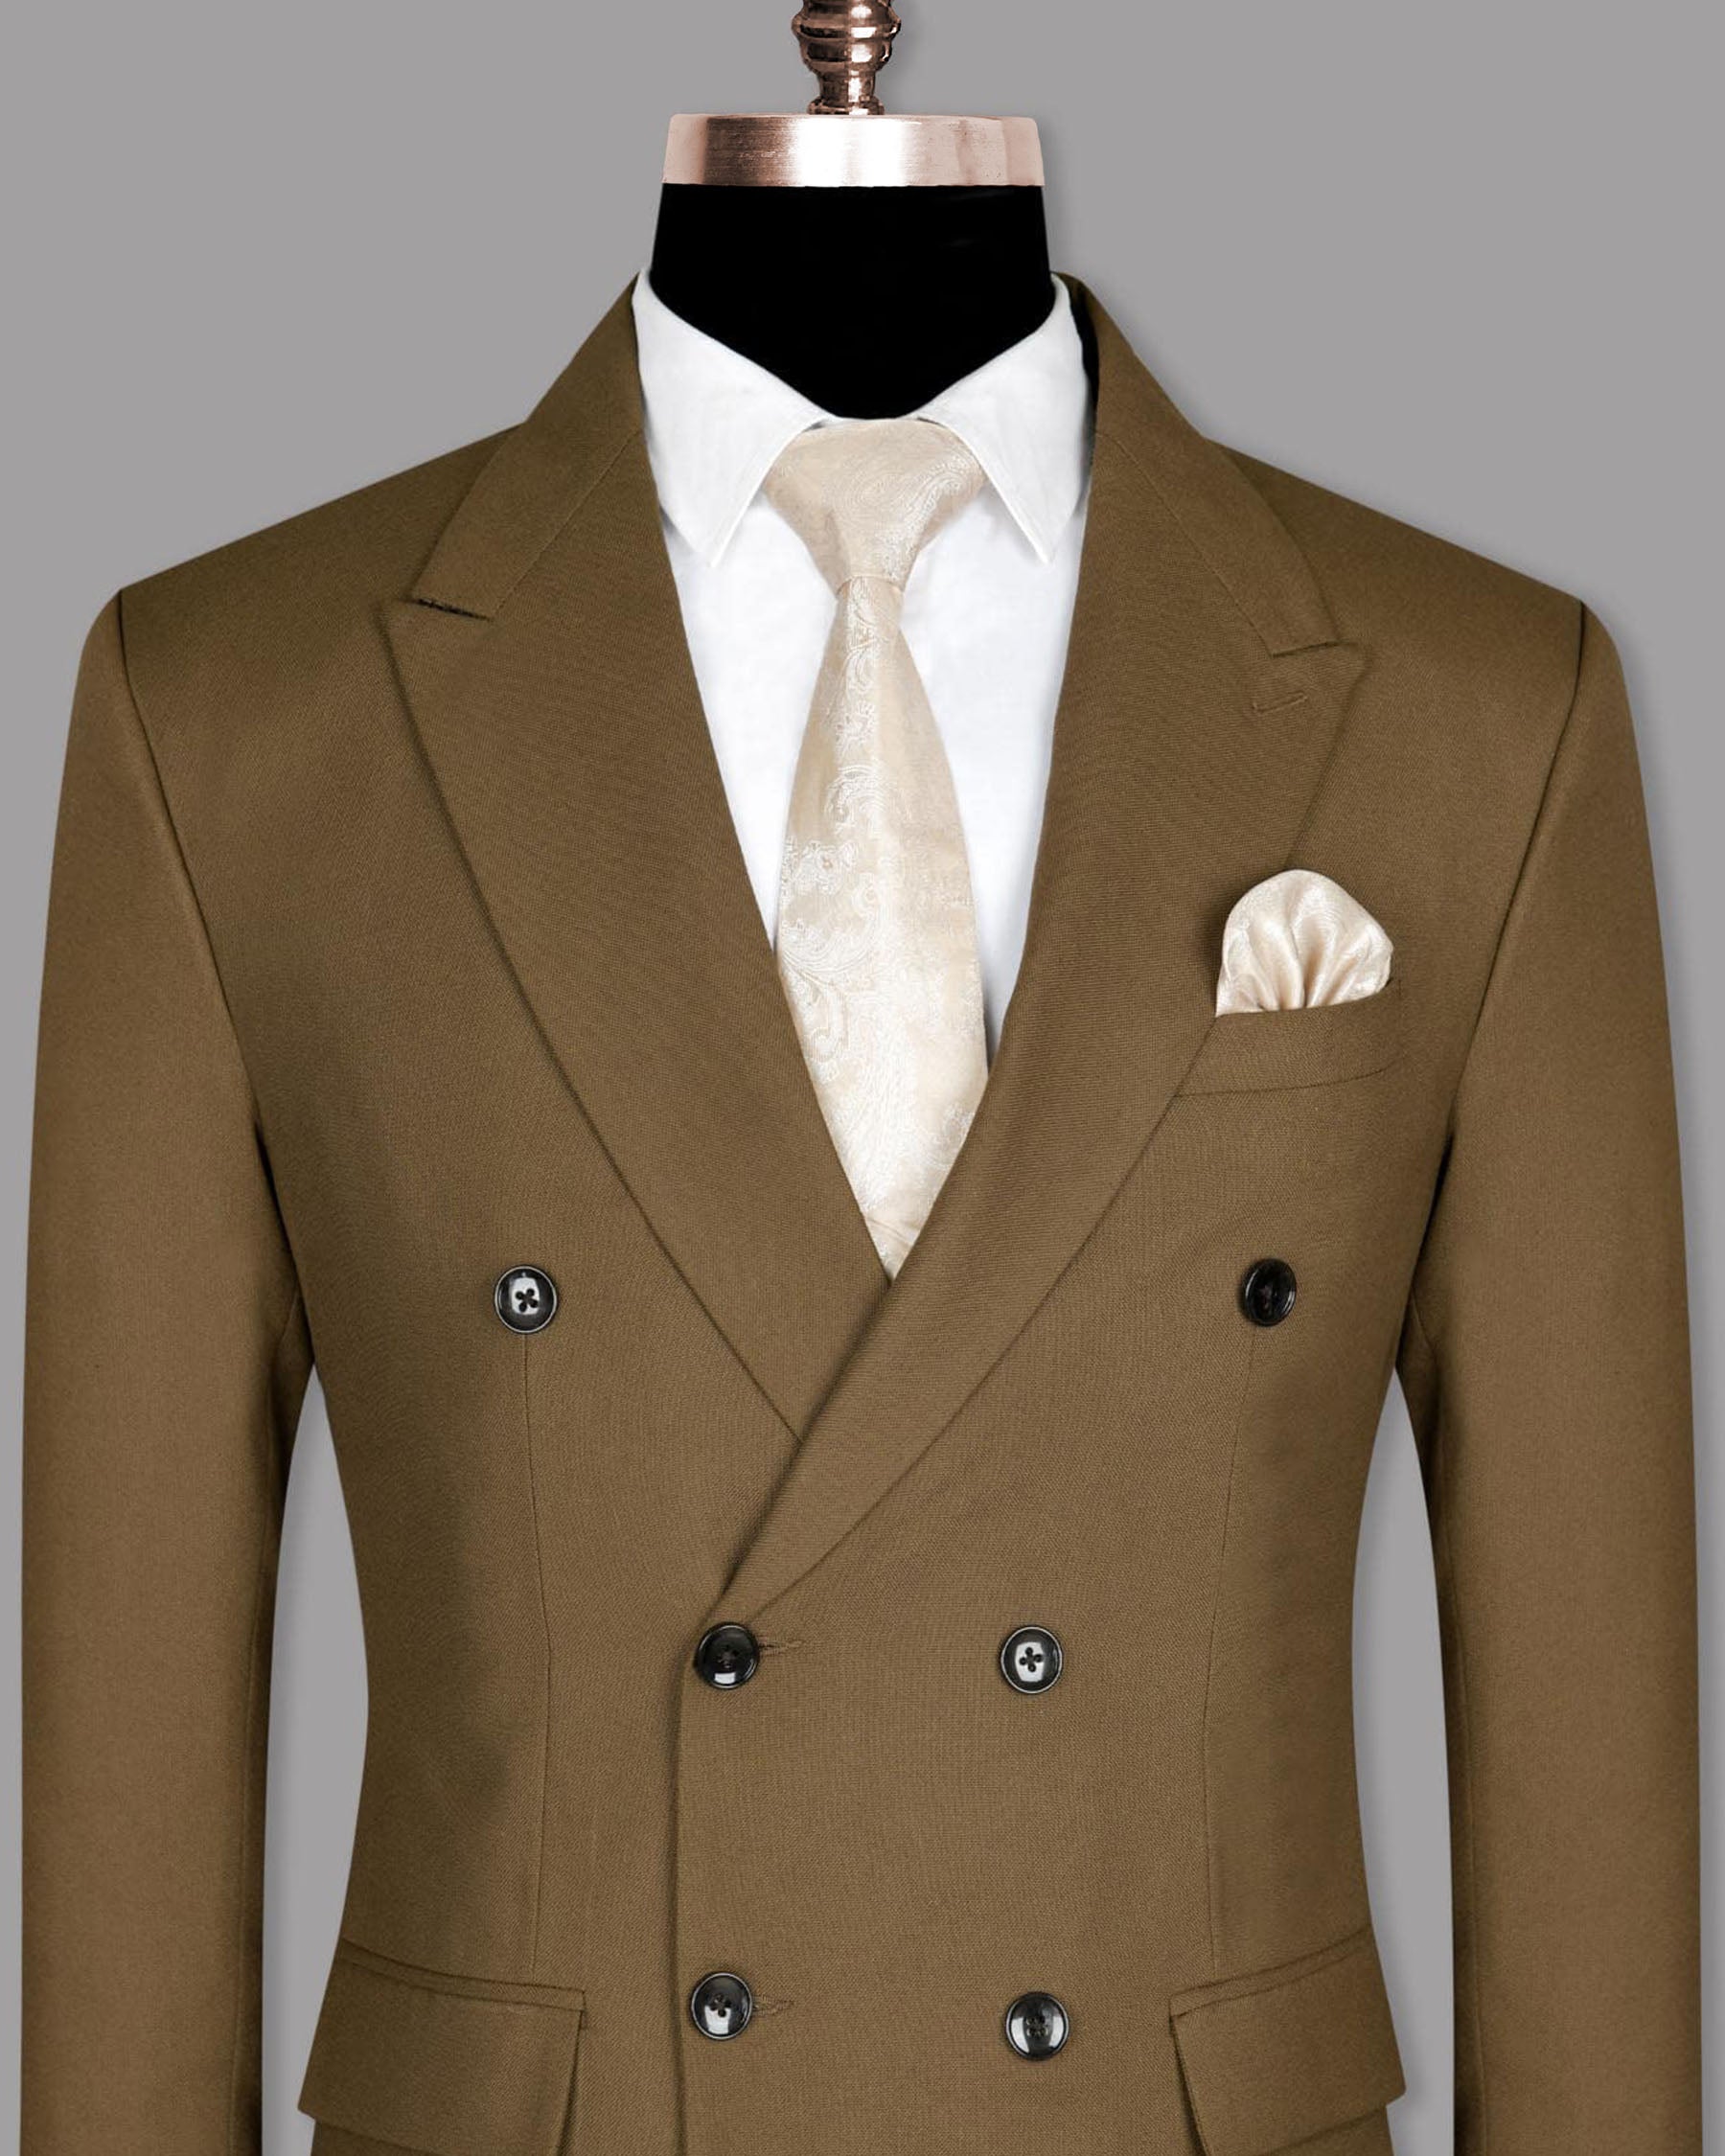 Soil Brown Wool Rich Double Breasted Blazer BL811DB-58, BL811DB-44, BL811DB-46, BL811DB-56, BL811DB-60, BL811DB-36, BL811DB-42, BL811DB-50, BL811DB-38, BL811DB-48, BL811DB-40, BL811DB-52, BL811DB-54